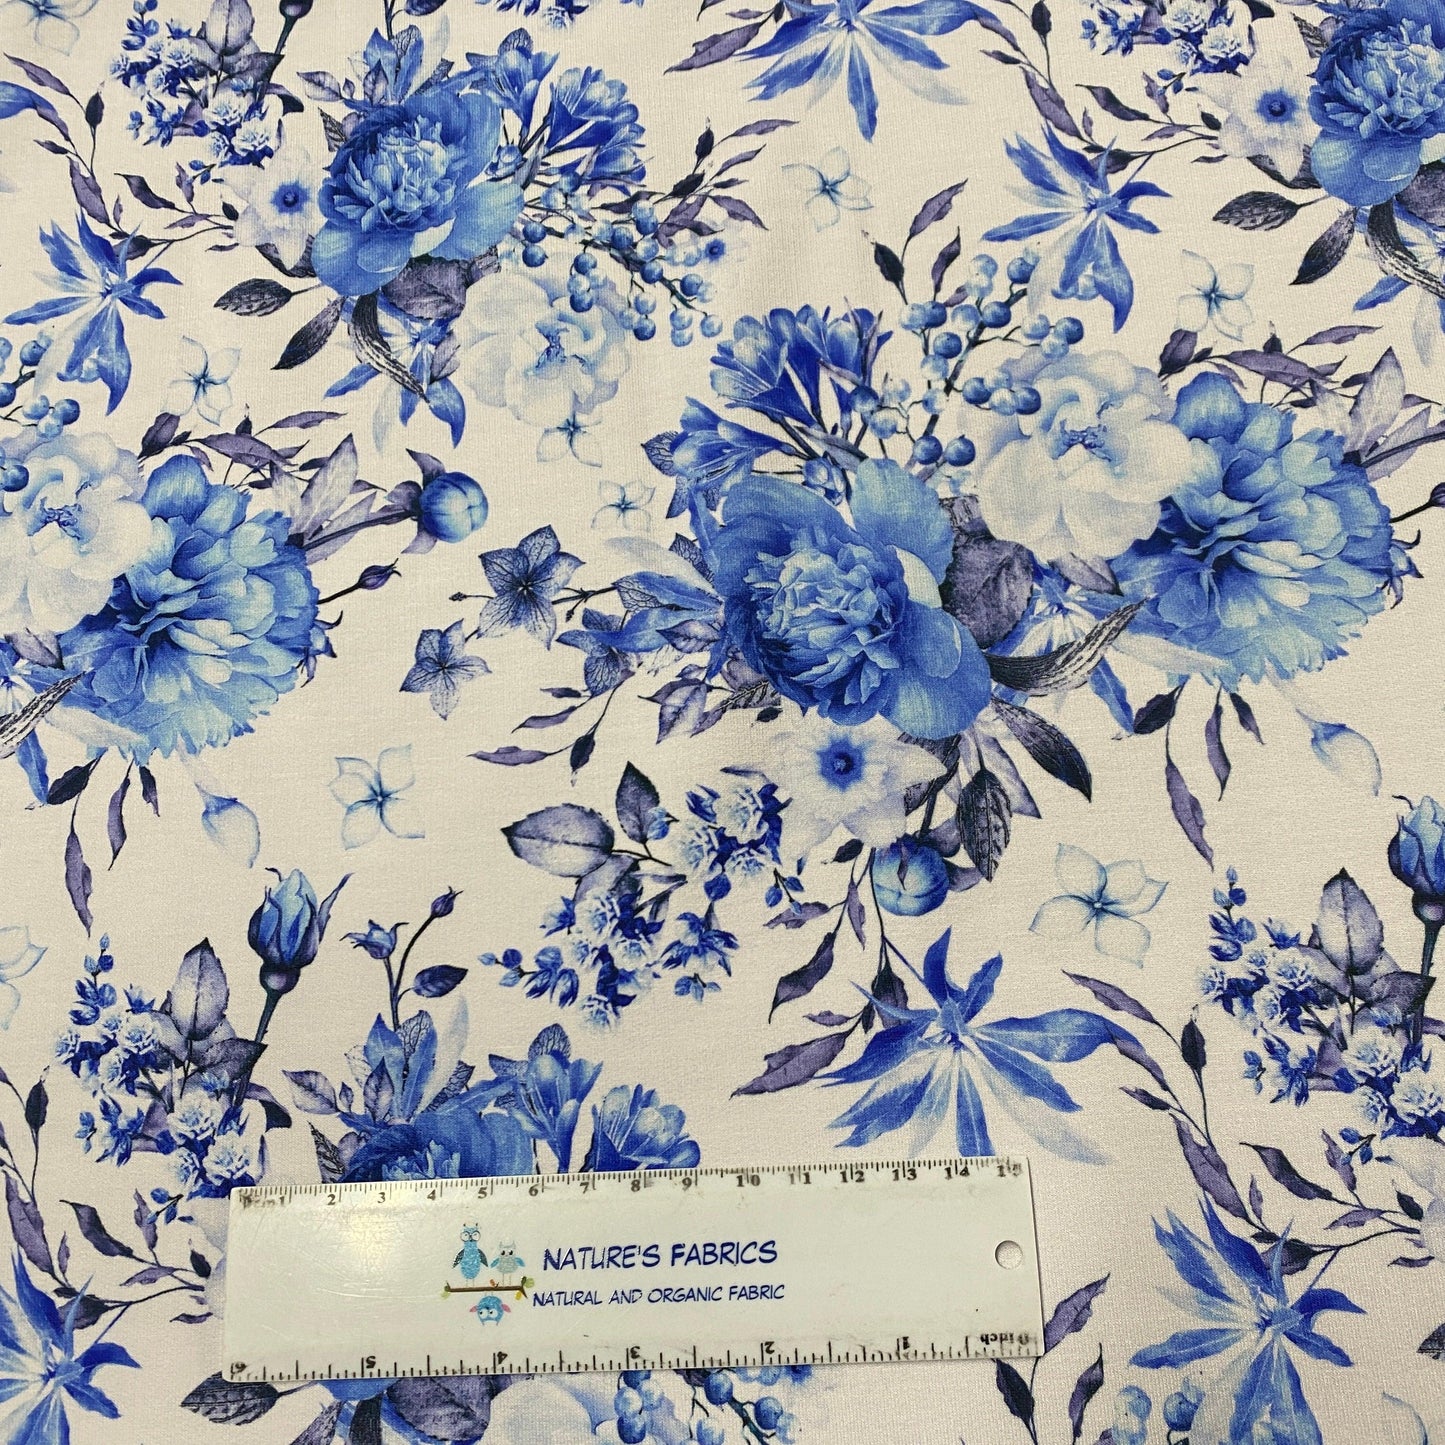 Blue Roses on White Bamboo Stretch French Terry Fabric - Nature's Fabrics